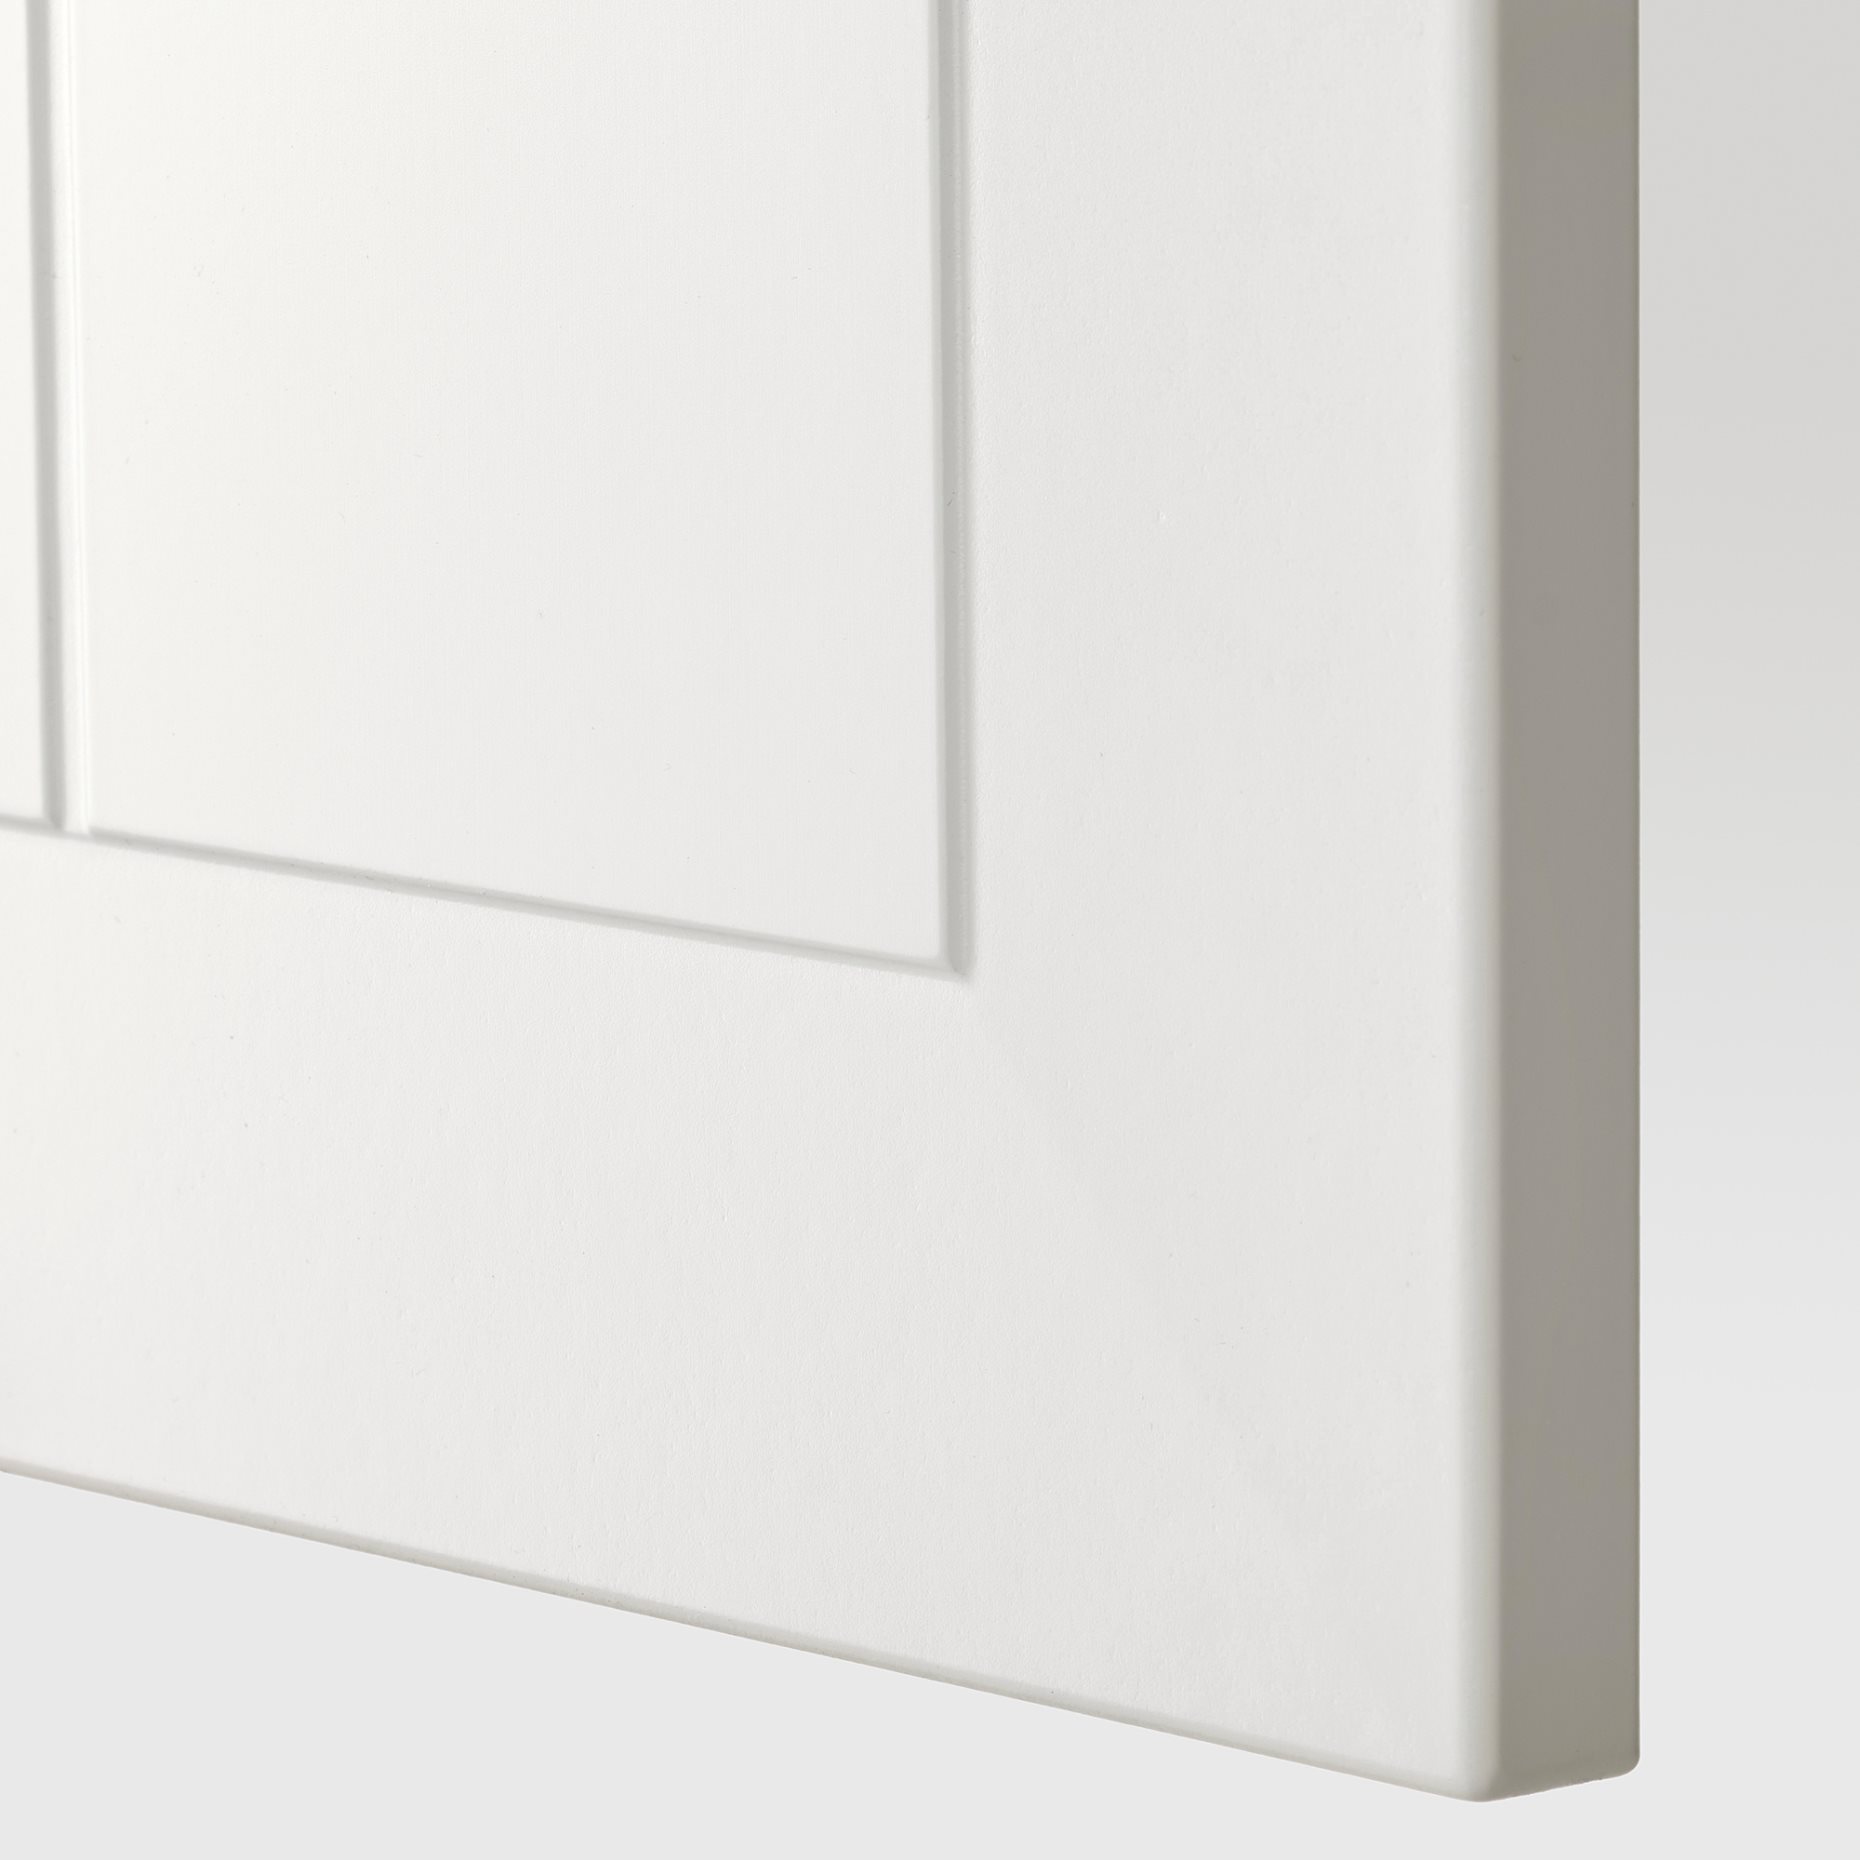 METOD, wall cabinet with shelves, 40x100 cm, 394.655.26